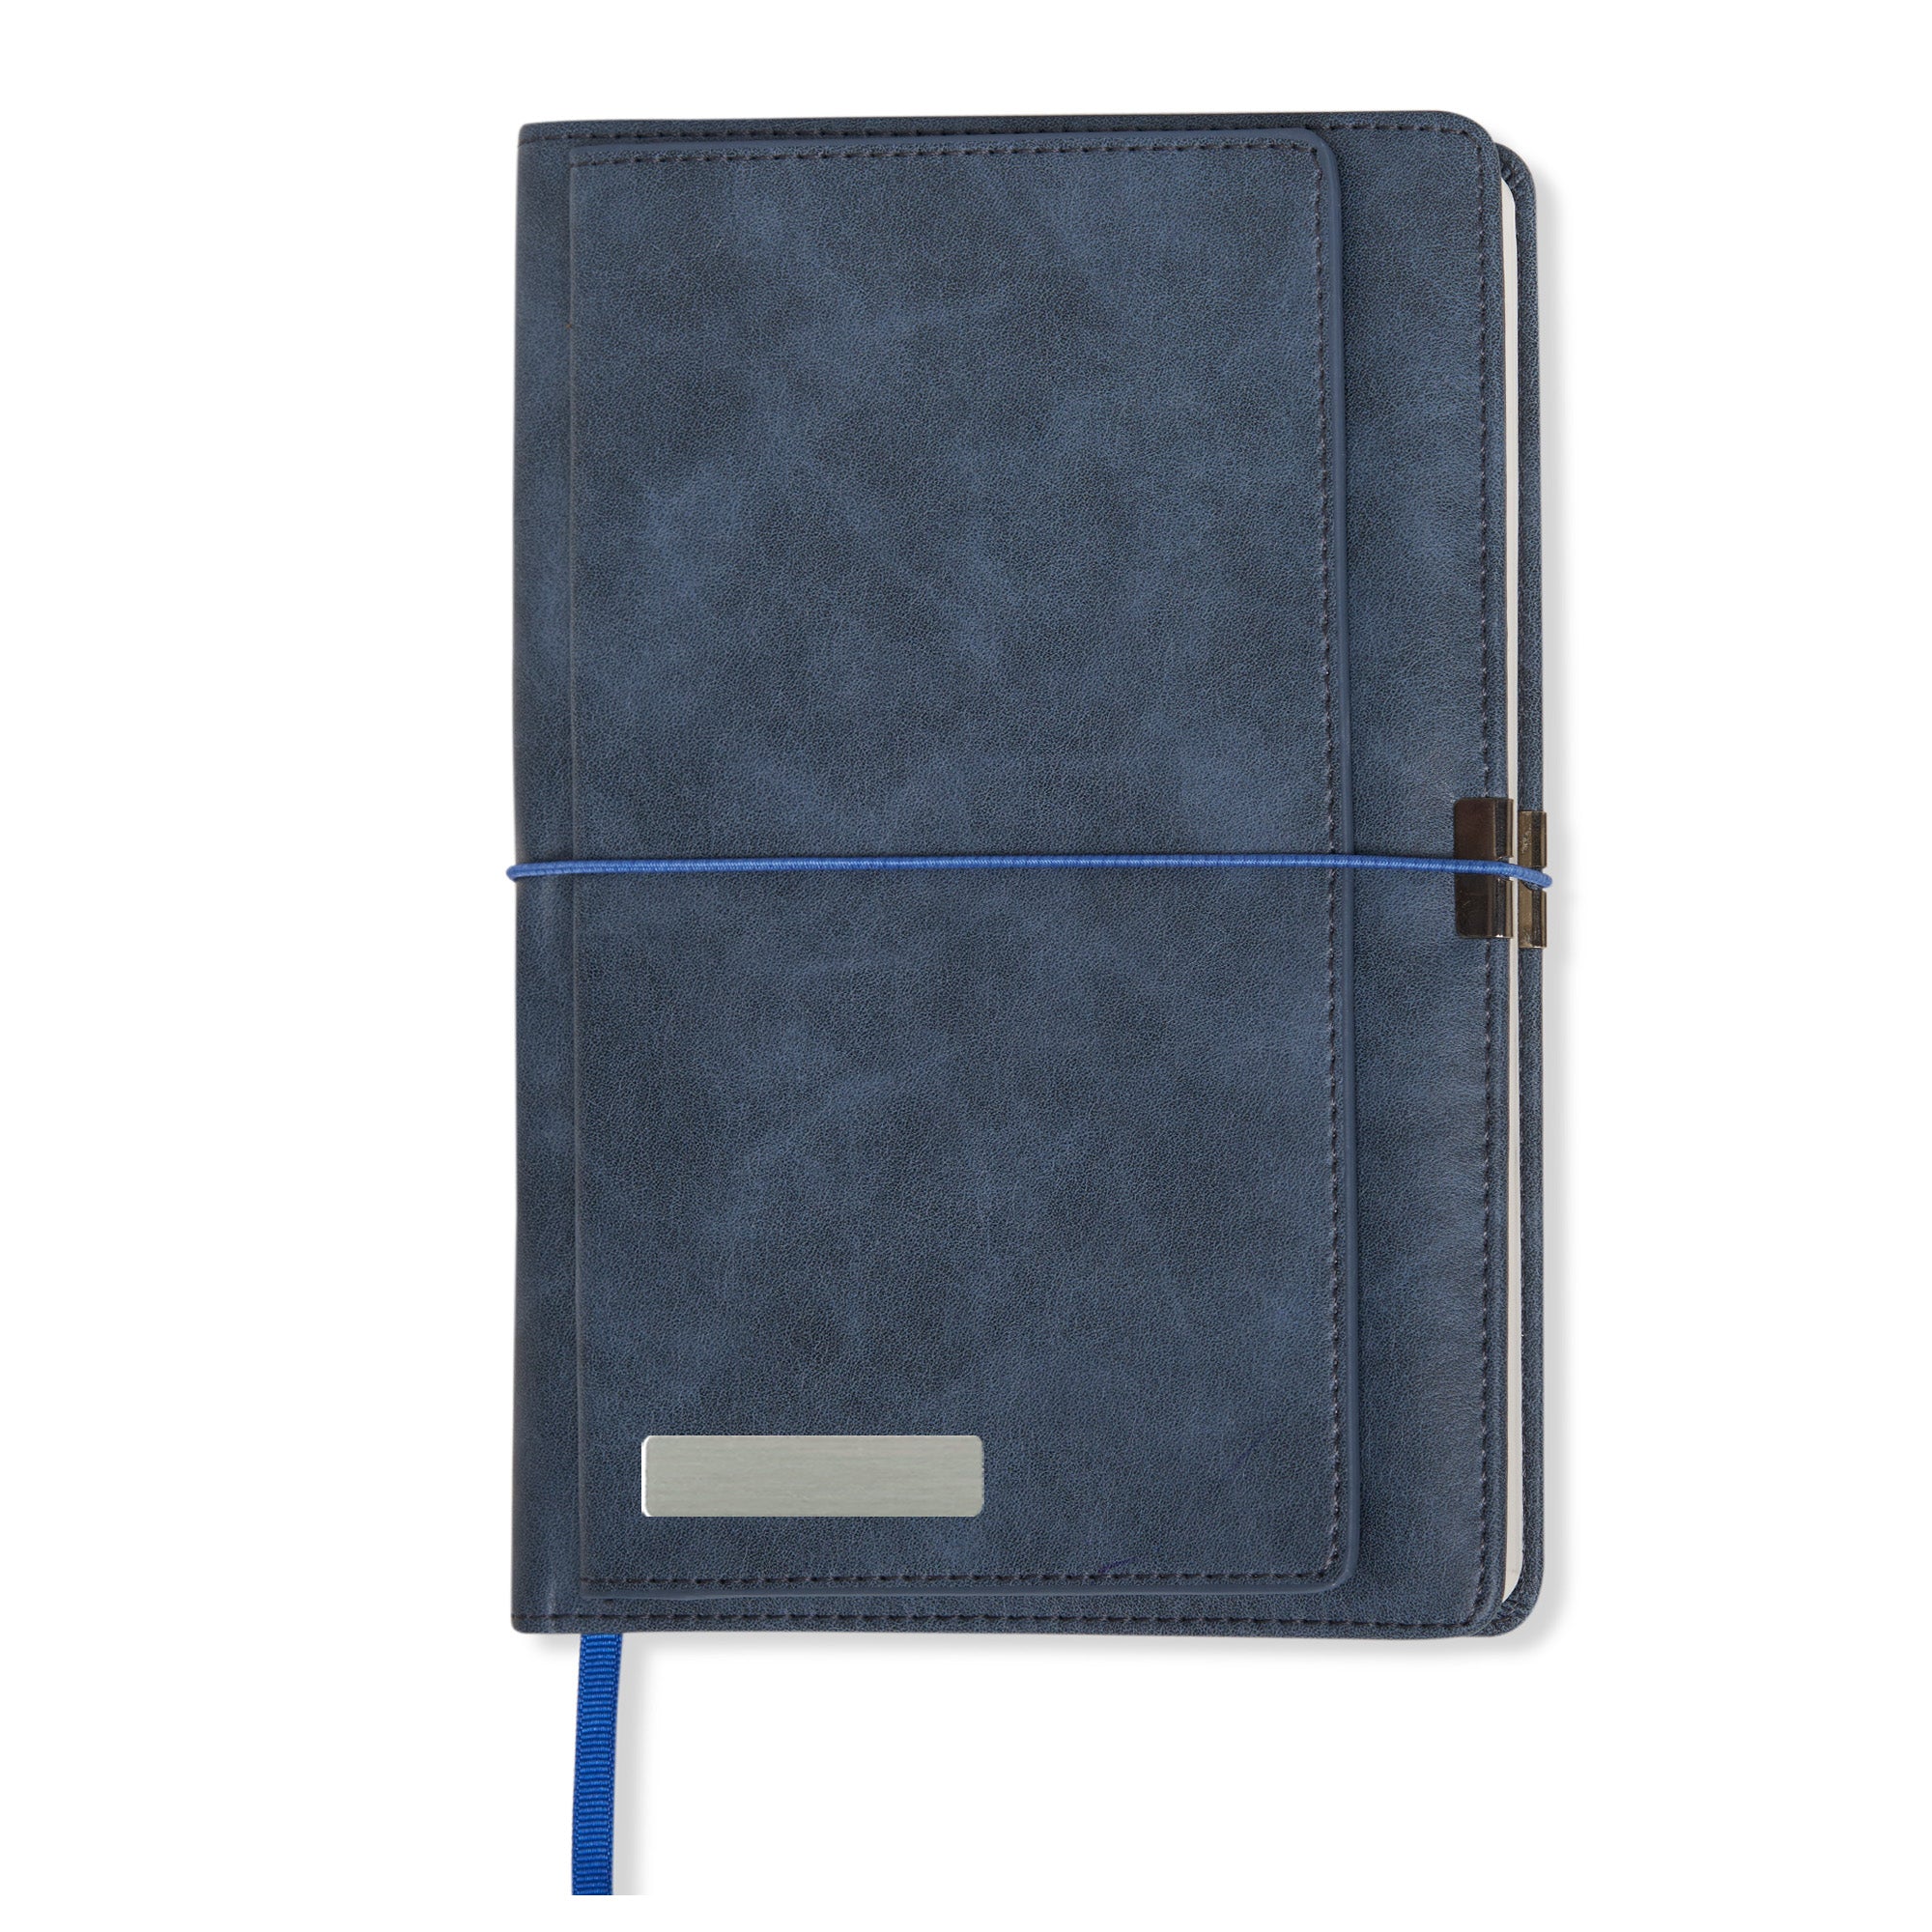 Personalized Cambie - A5 Hard Bound Sophisticated Faux Leather Executive Notebook Diary - Blue